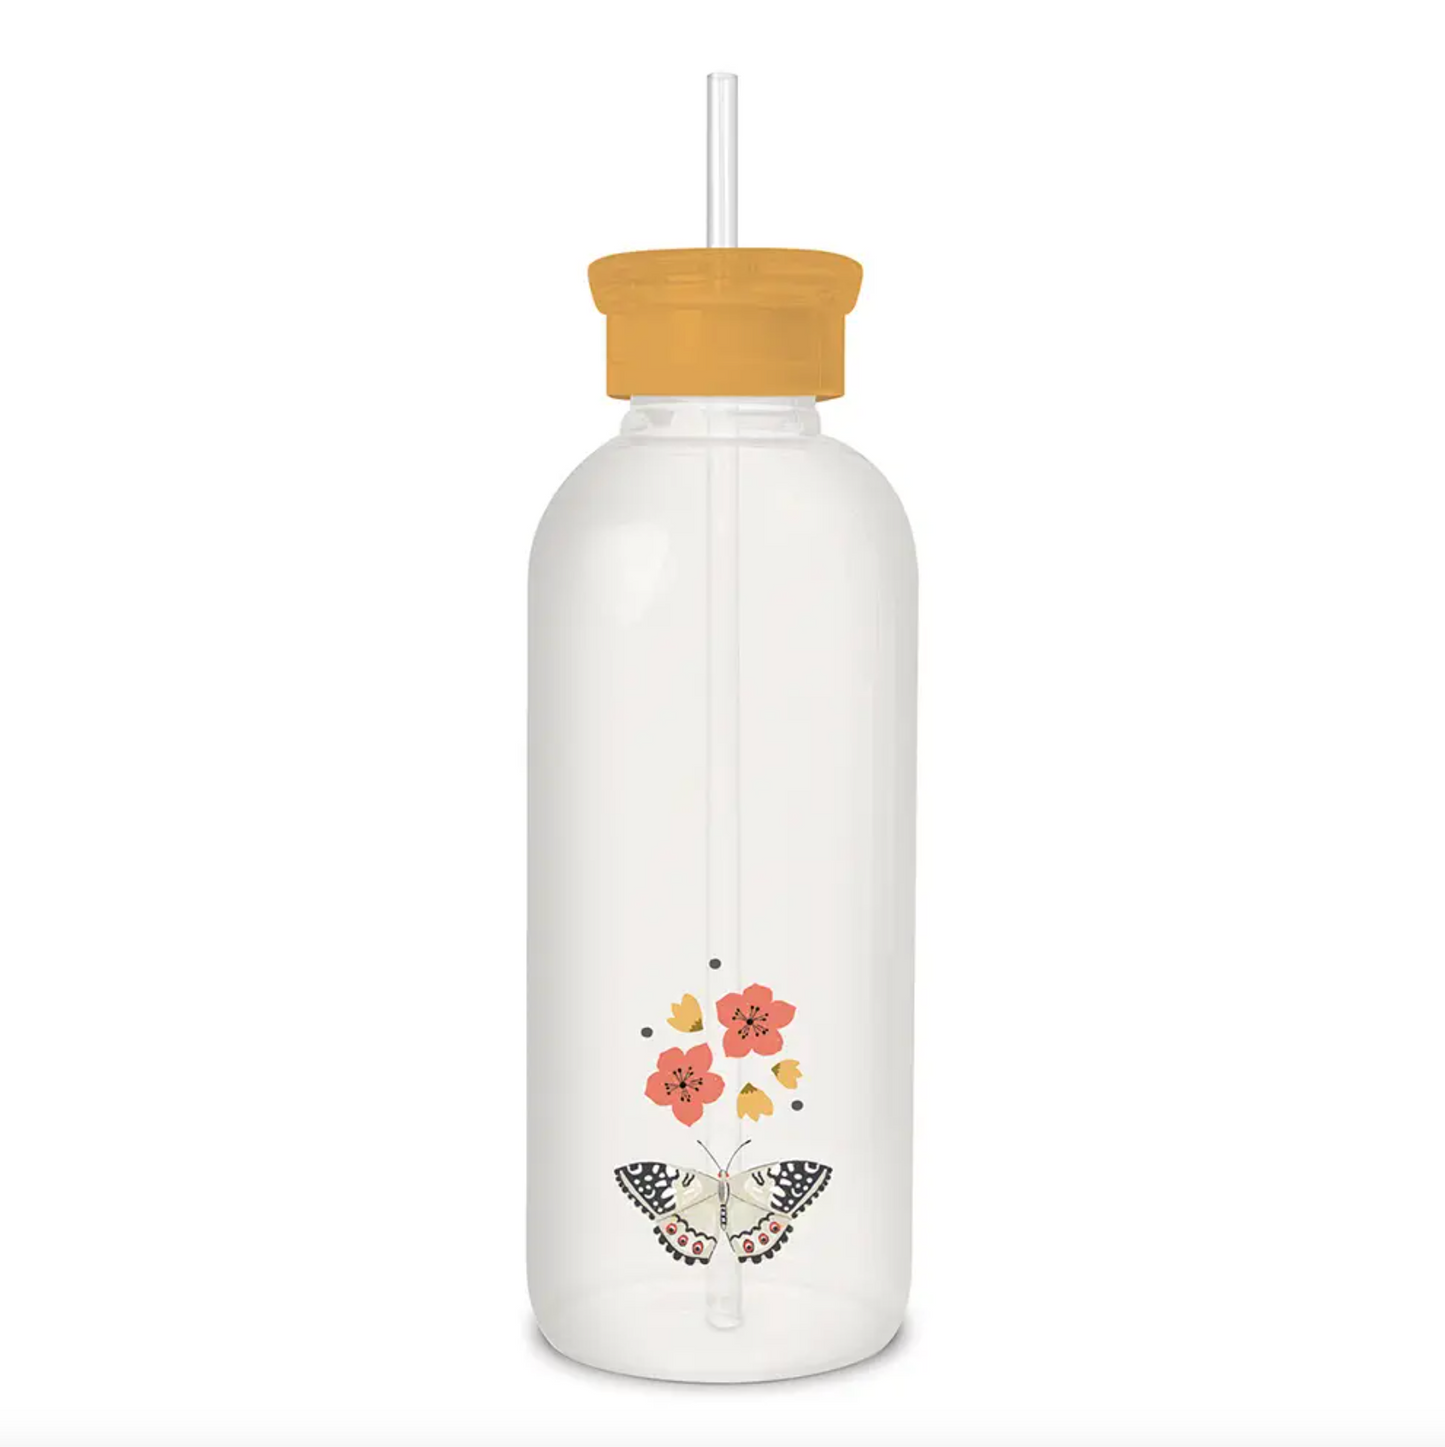 Grow Evolve Transform Glass Water Bottle with Straw